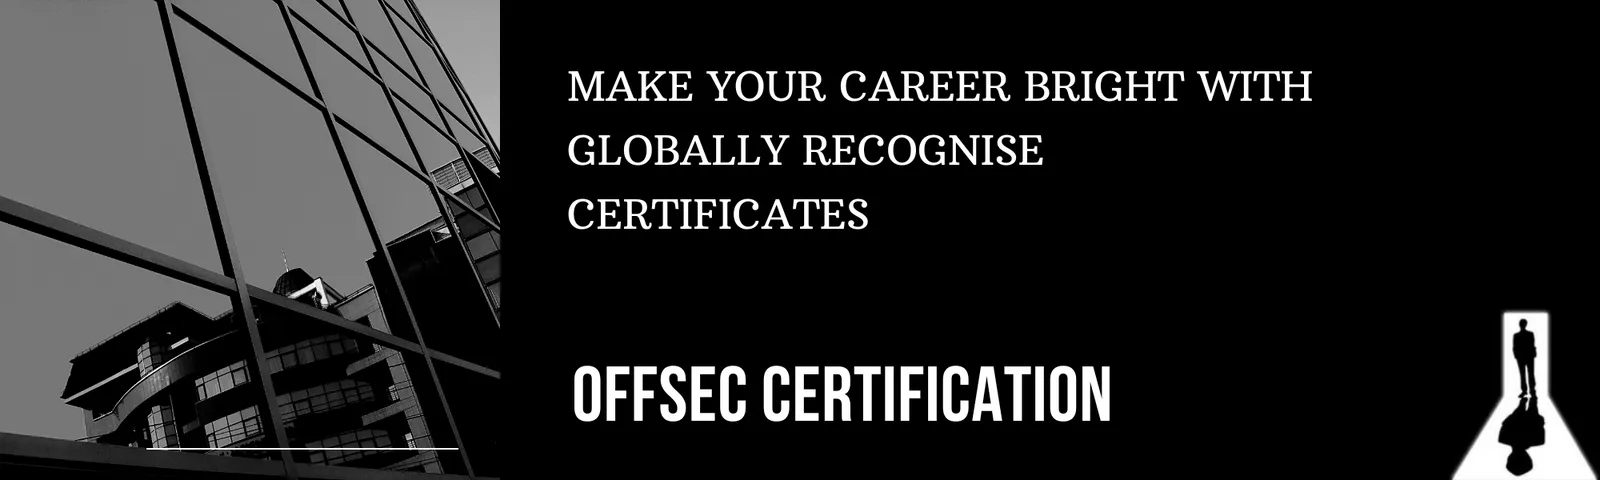 GET OSCP CERTIFICATION WITHOUT NEED TO SIT FOR THE EXAM 